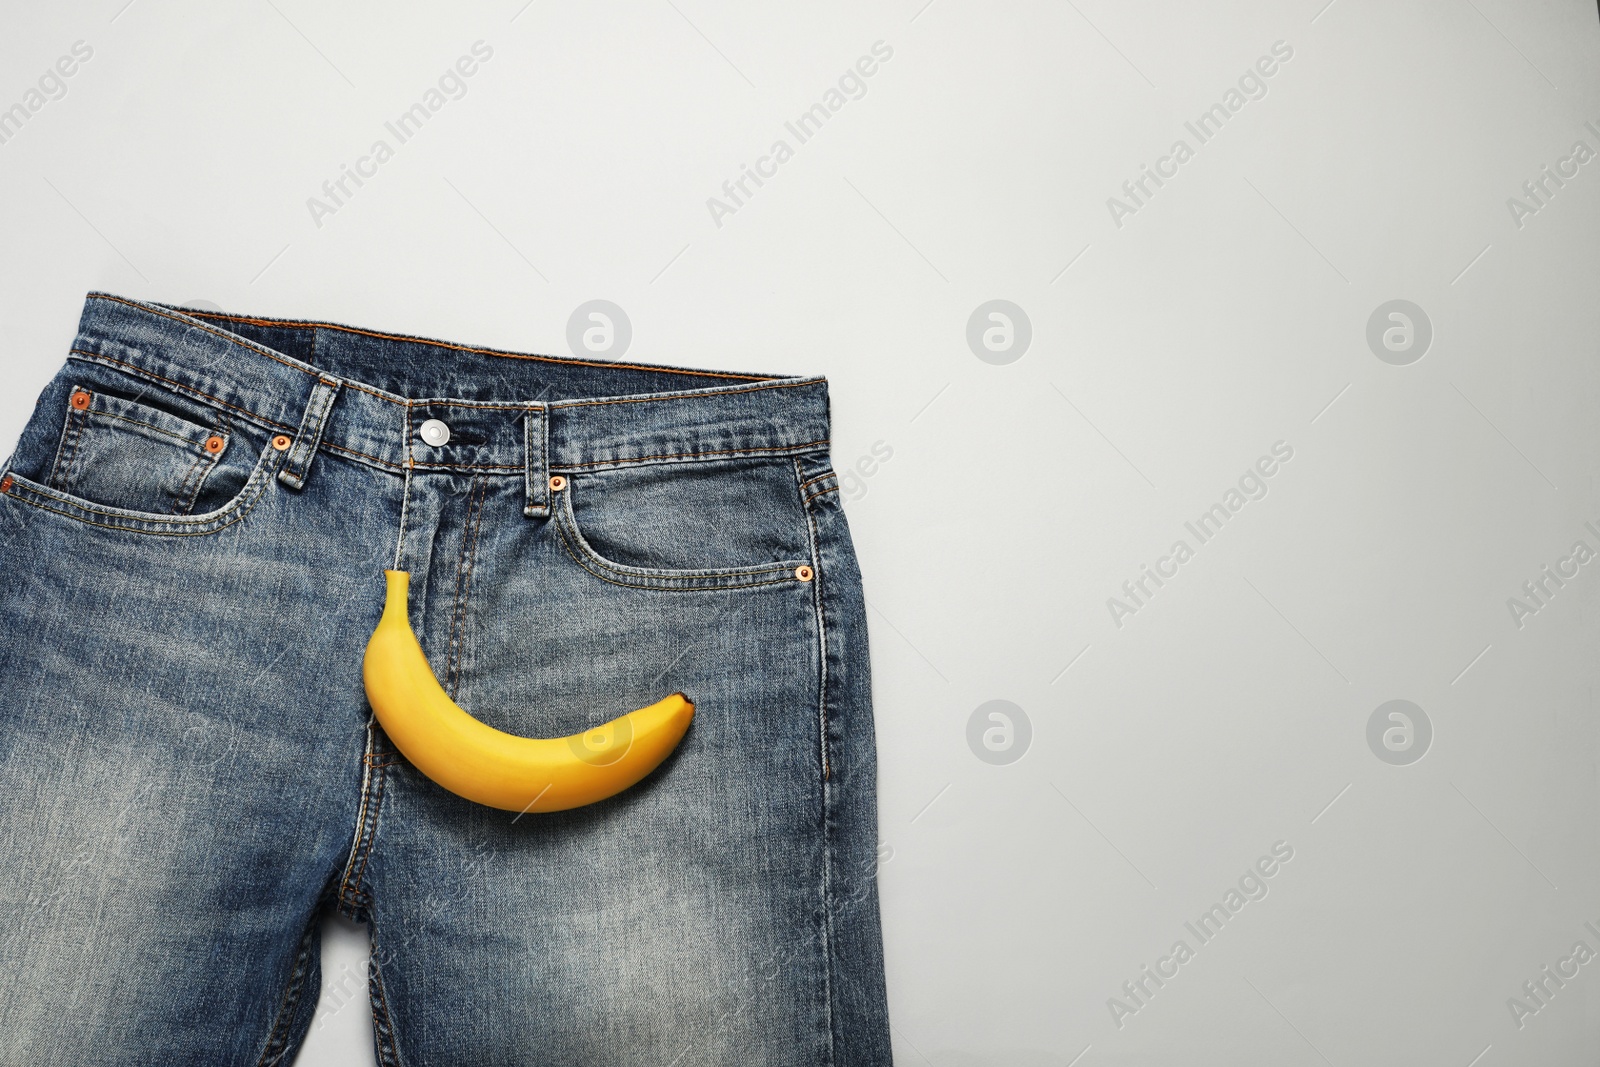 Photo of Men jeans with banana on light grey background, top view and space for text. Potency concept